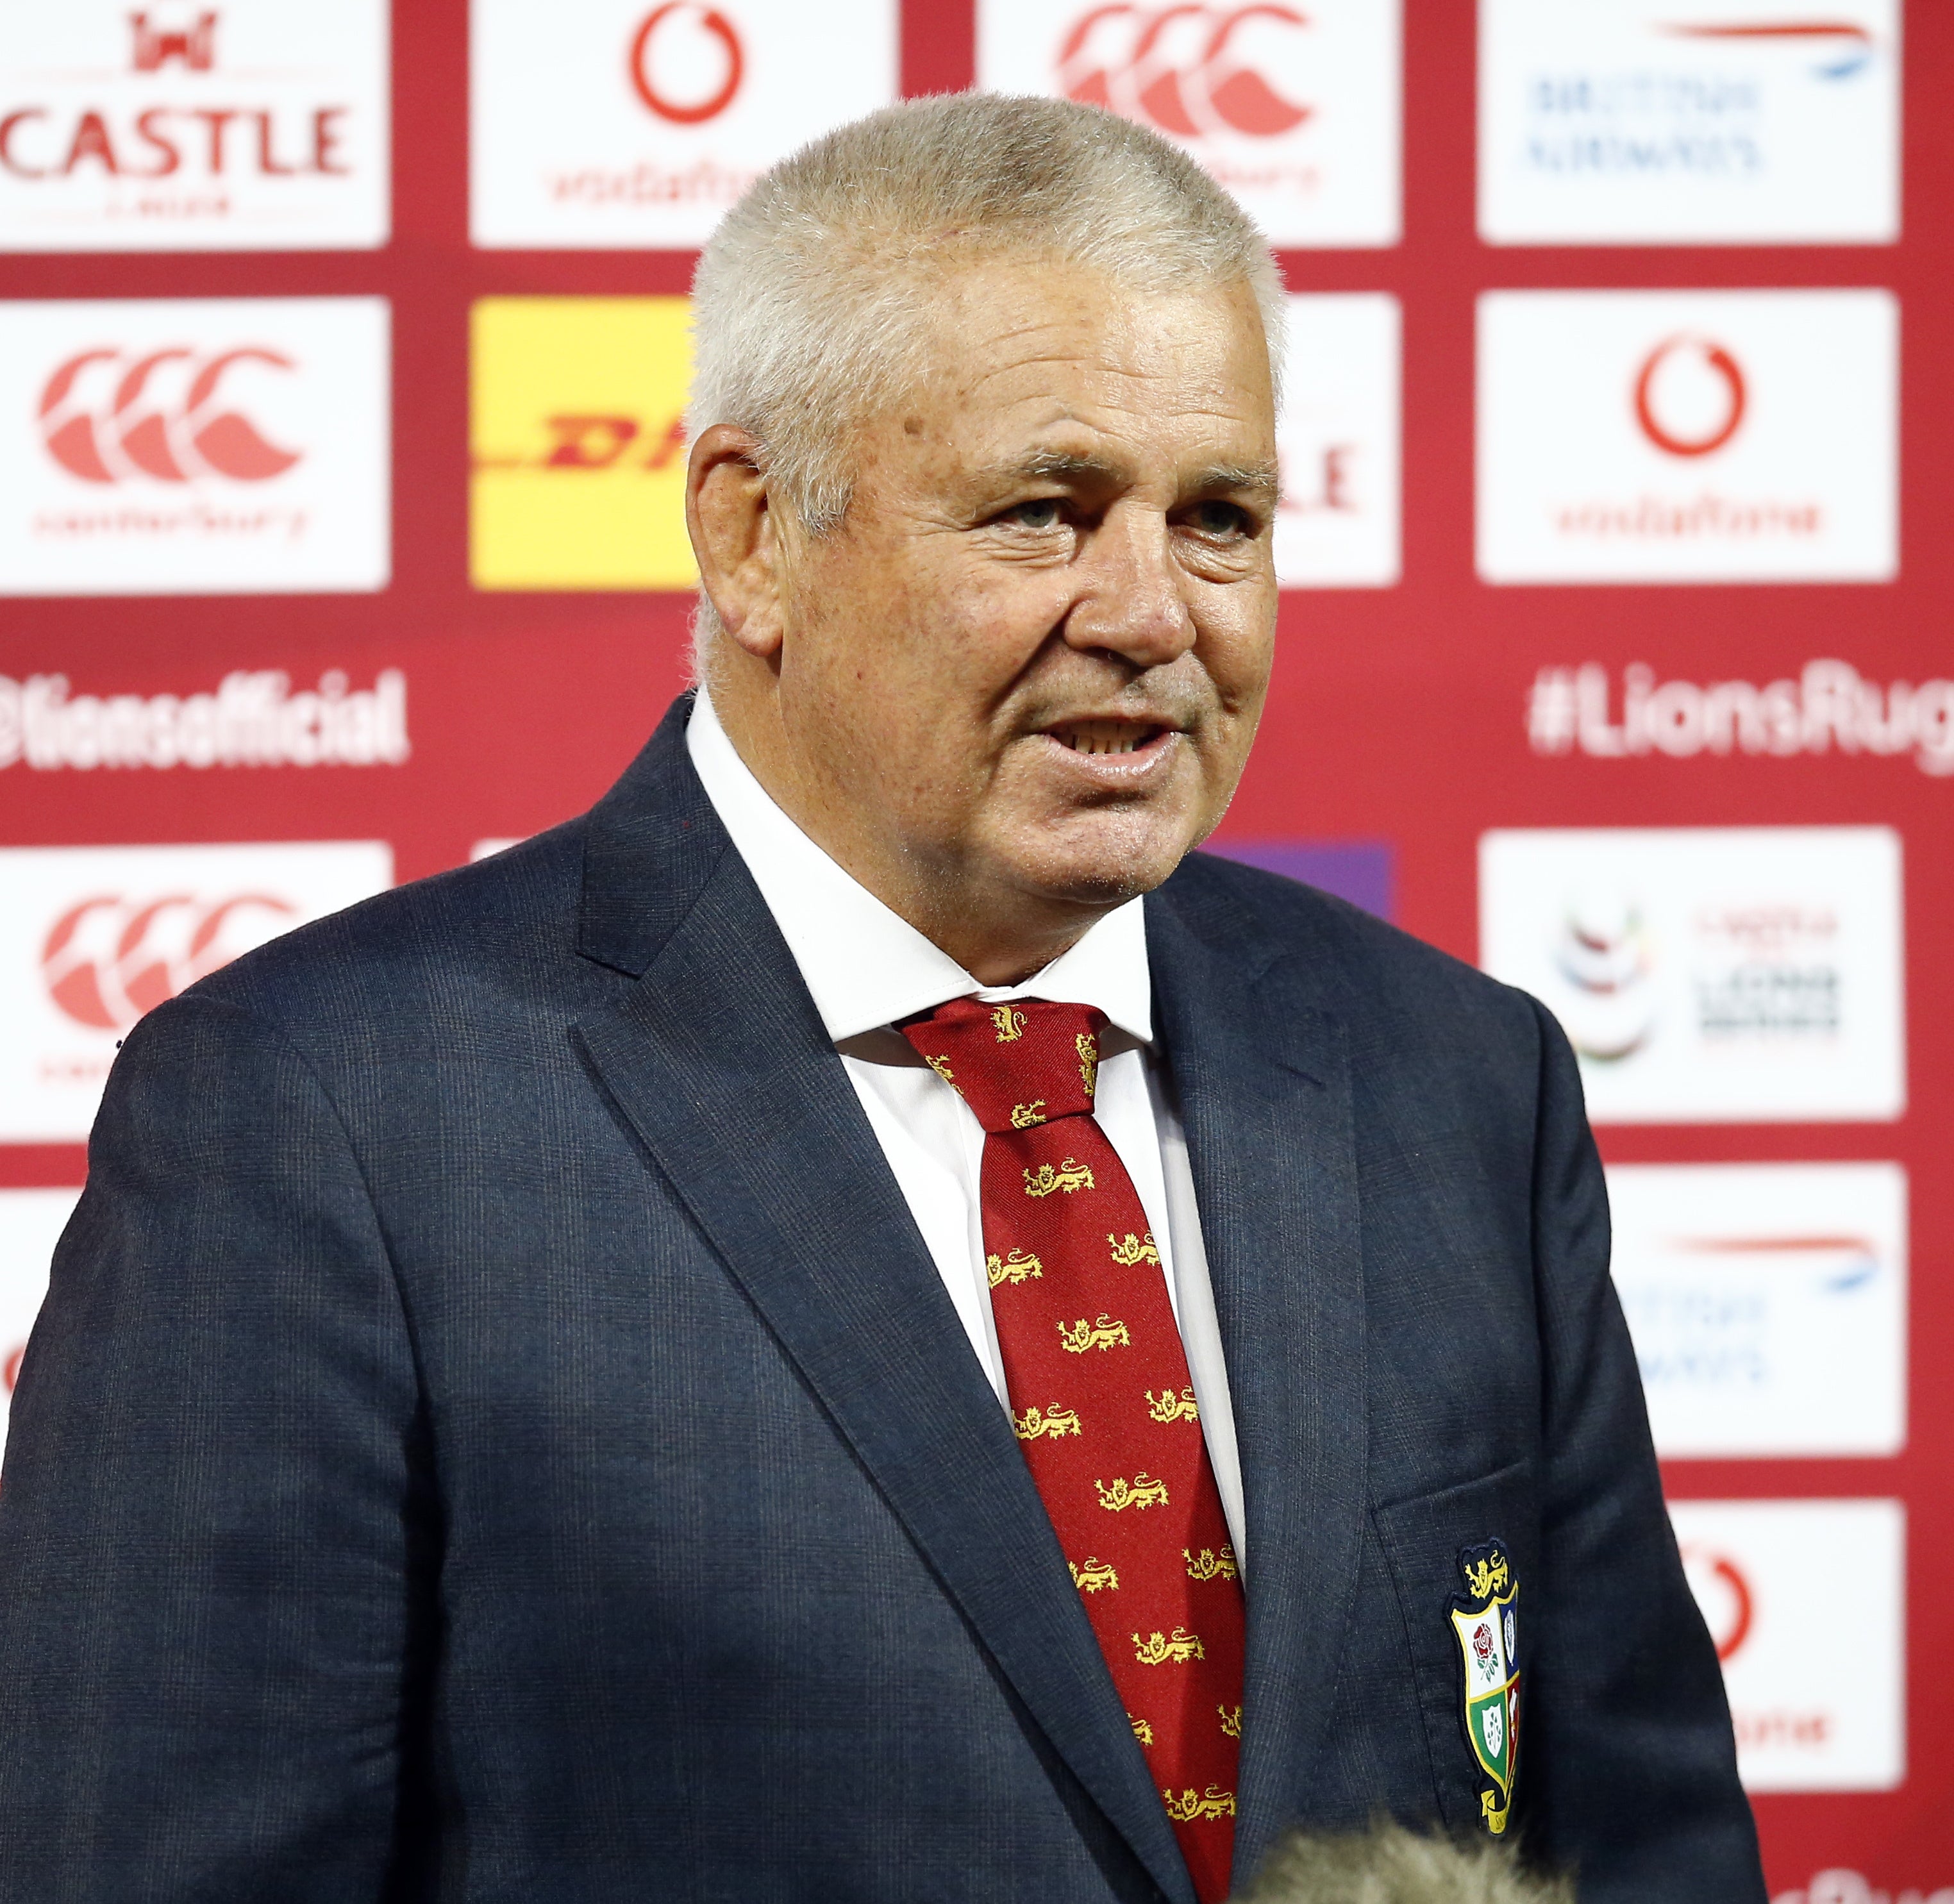 Warren Gatland says the last week has been the most chaotic of his career